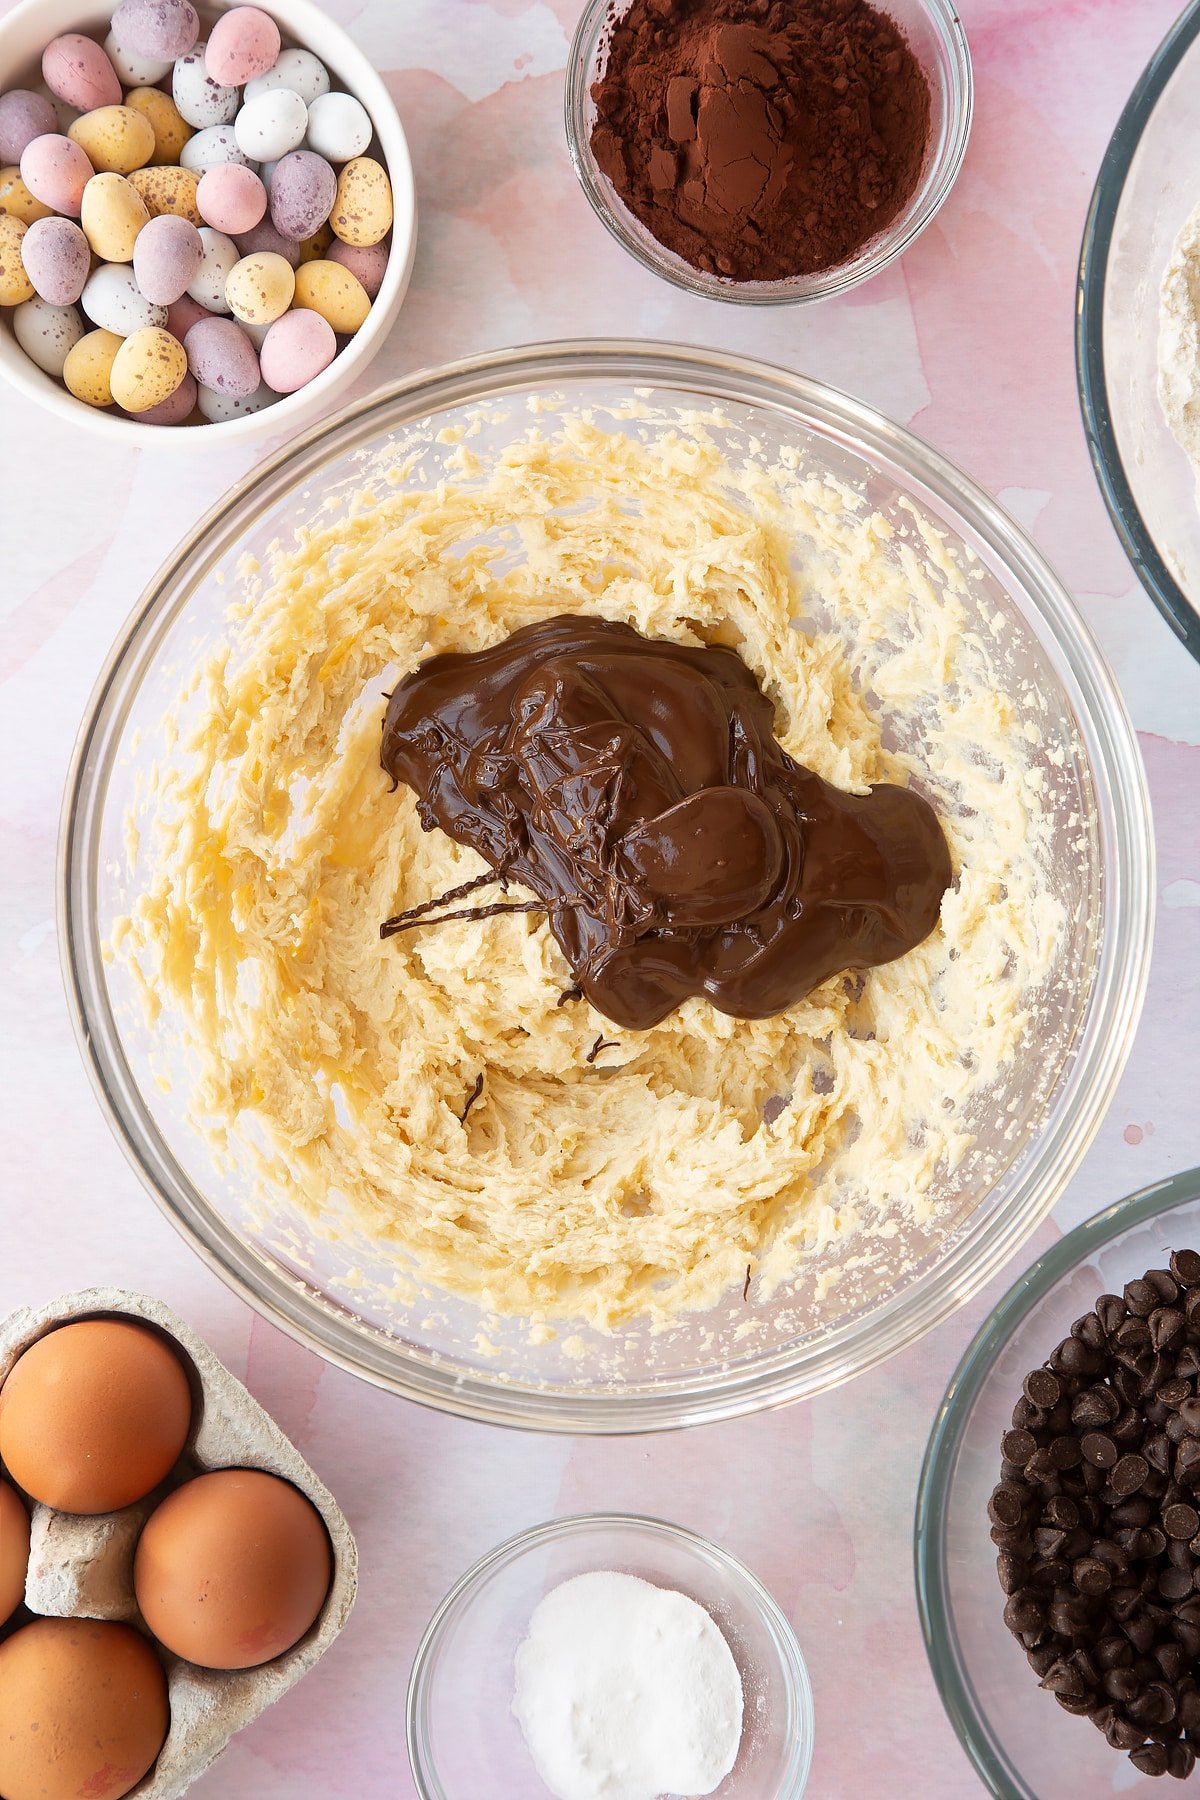 Butter, golden granulated sugar and egg beaten together in a bowl with melted dark chocolate on top. Ingredients to make Chocolate Easter cookies surround the bowl.